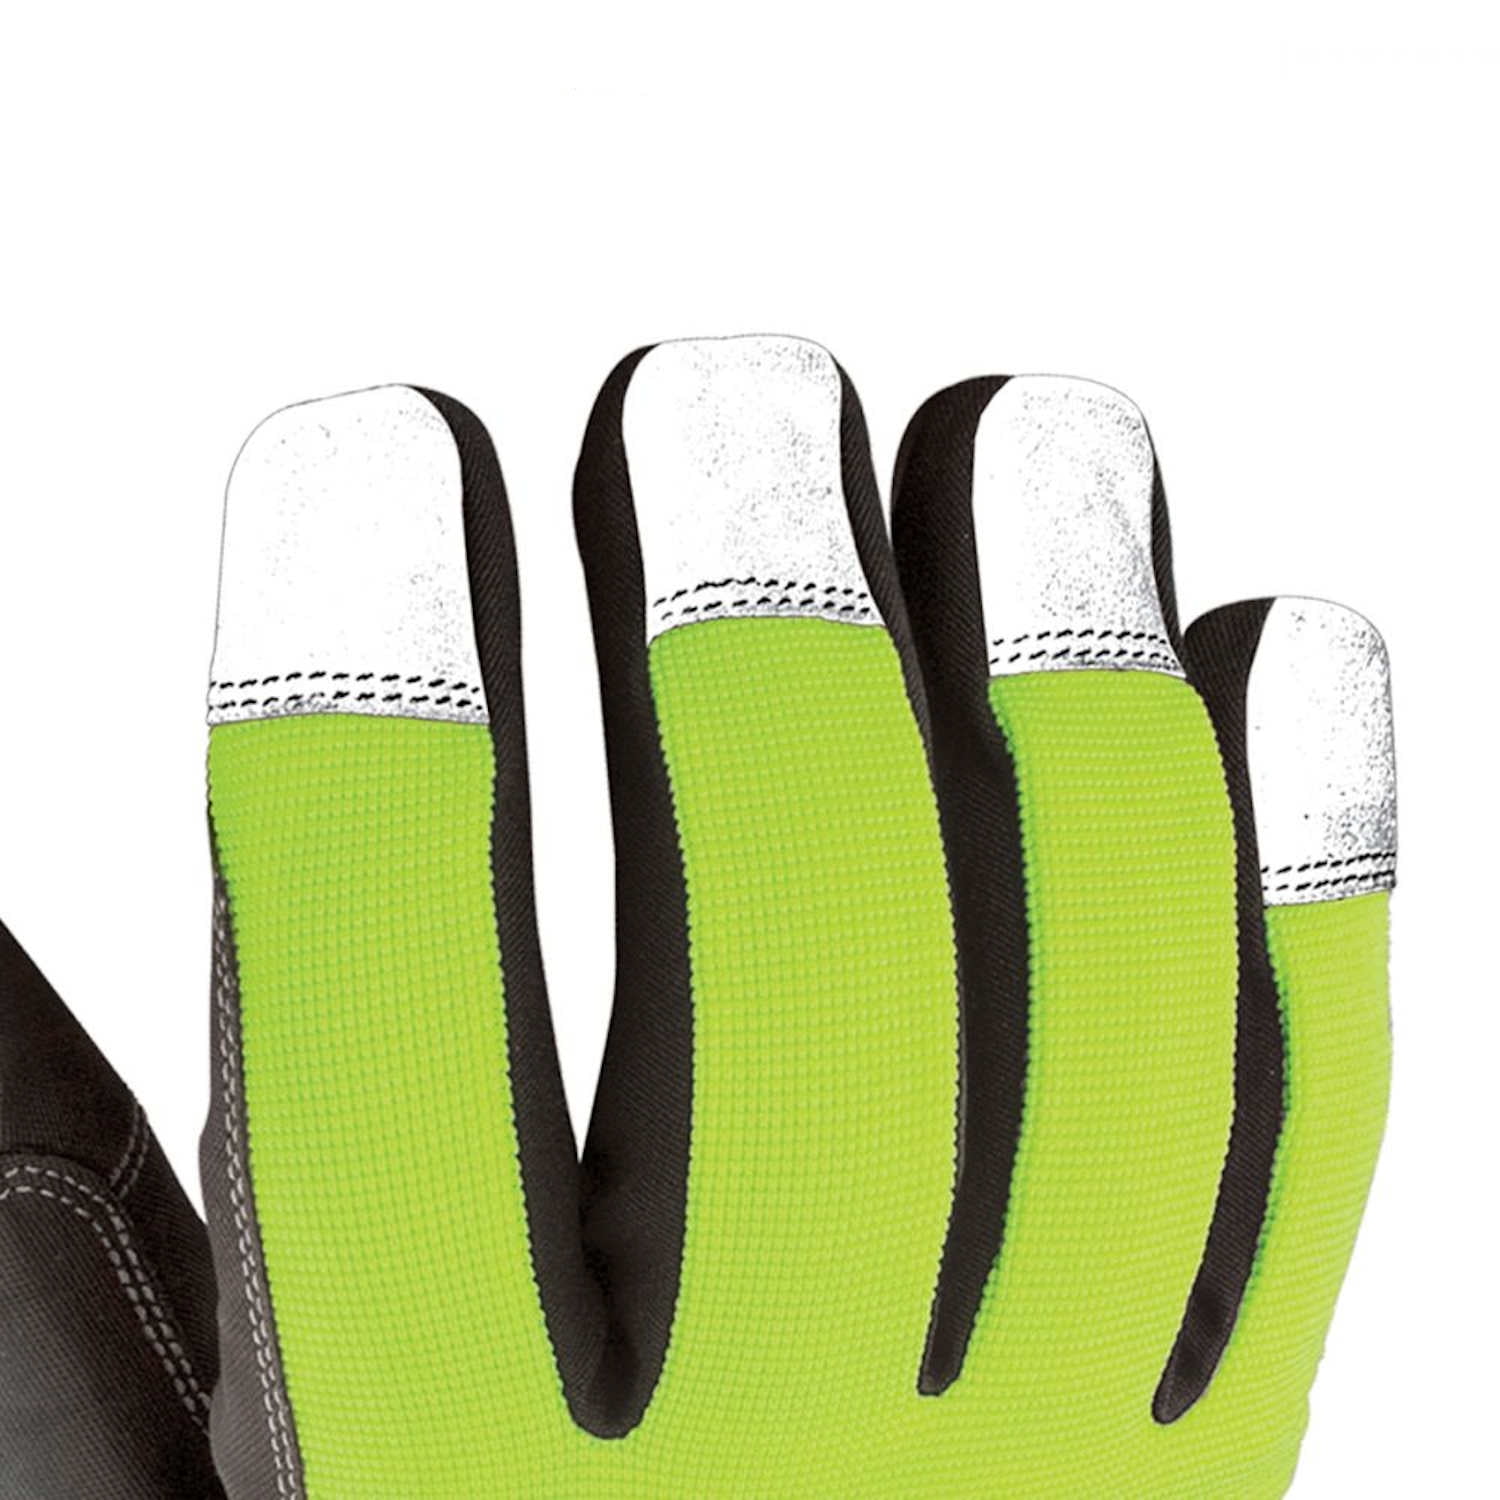 Details about   Youngstown Glove Safety Lime HiVis Waterproof Winter Glove 